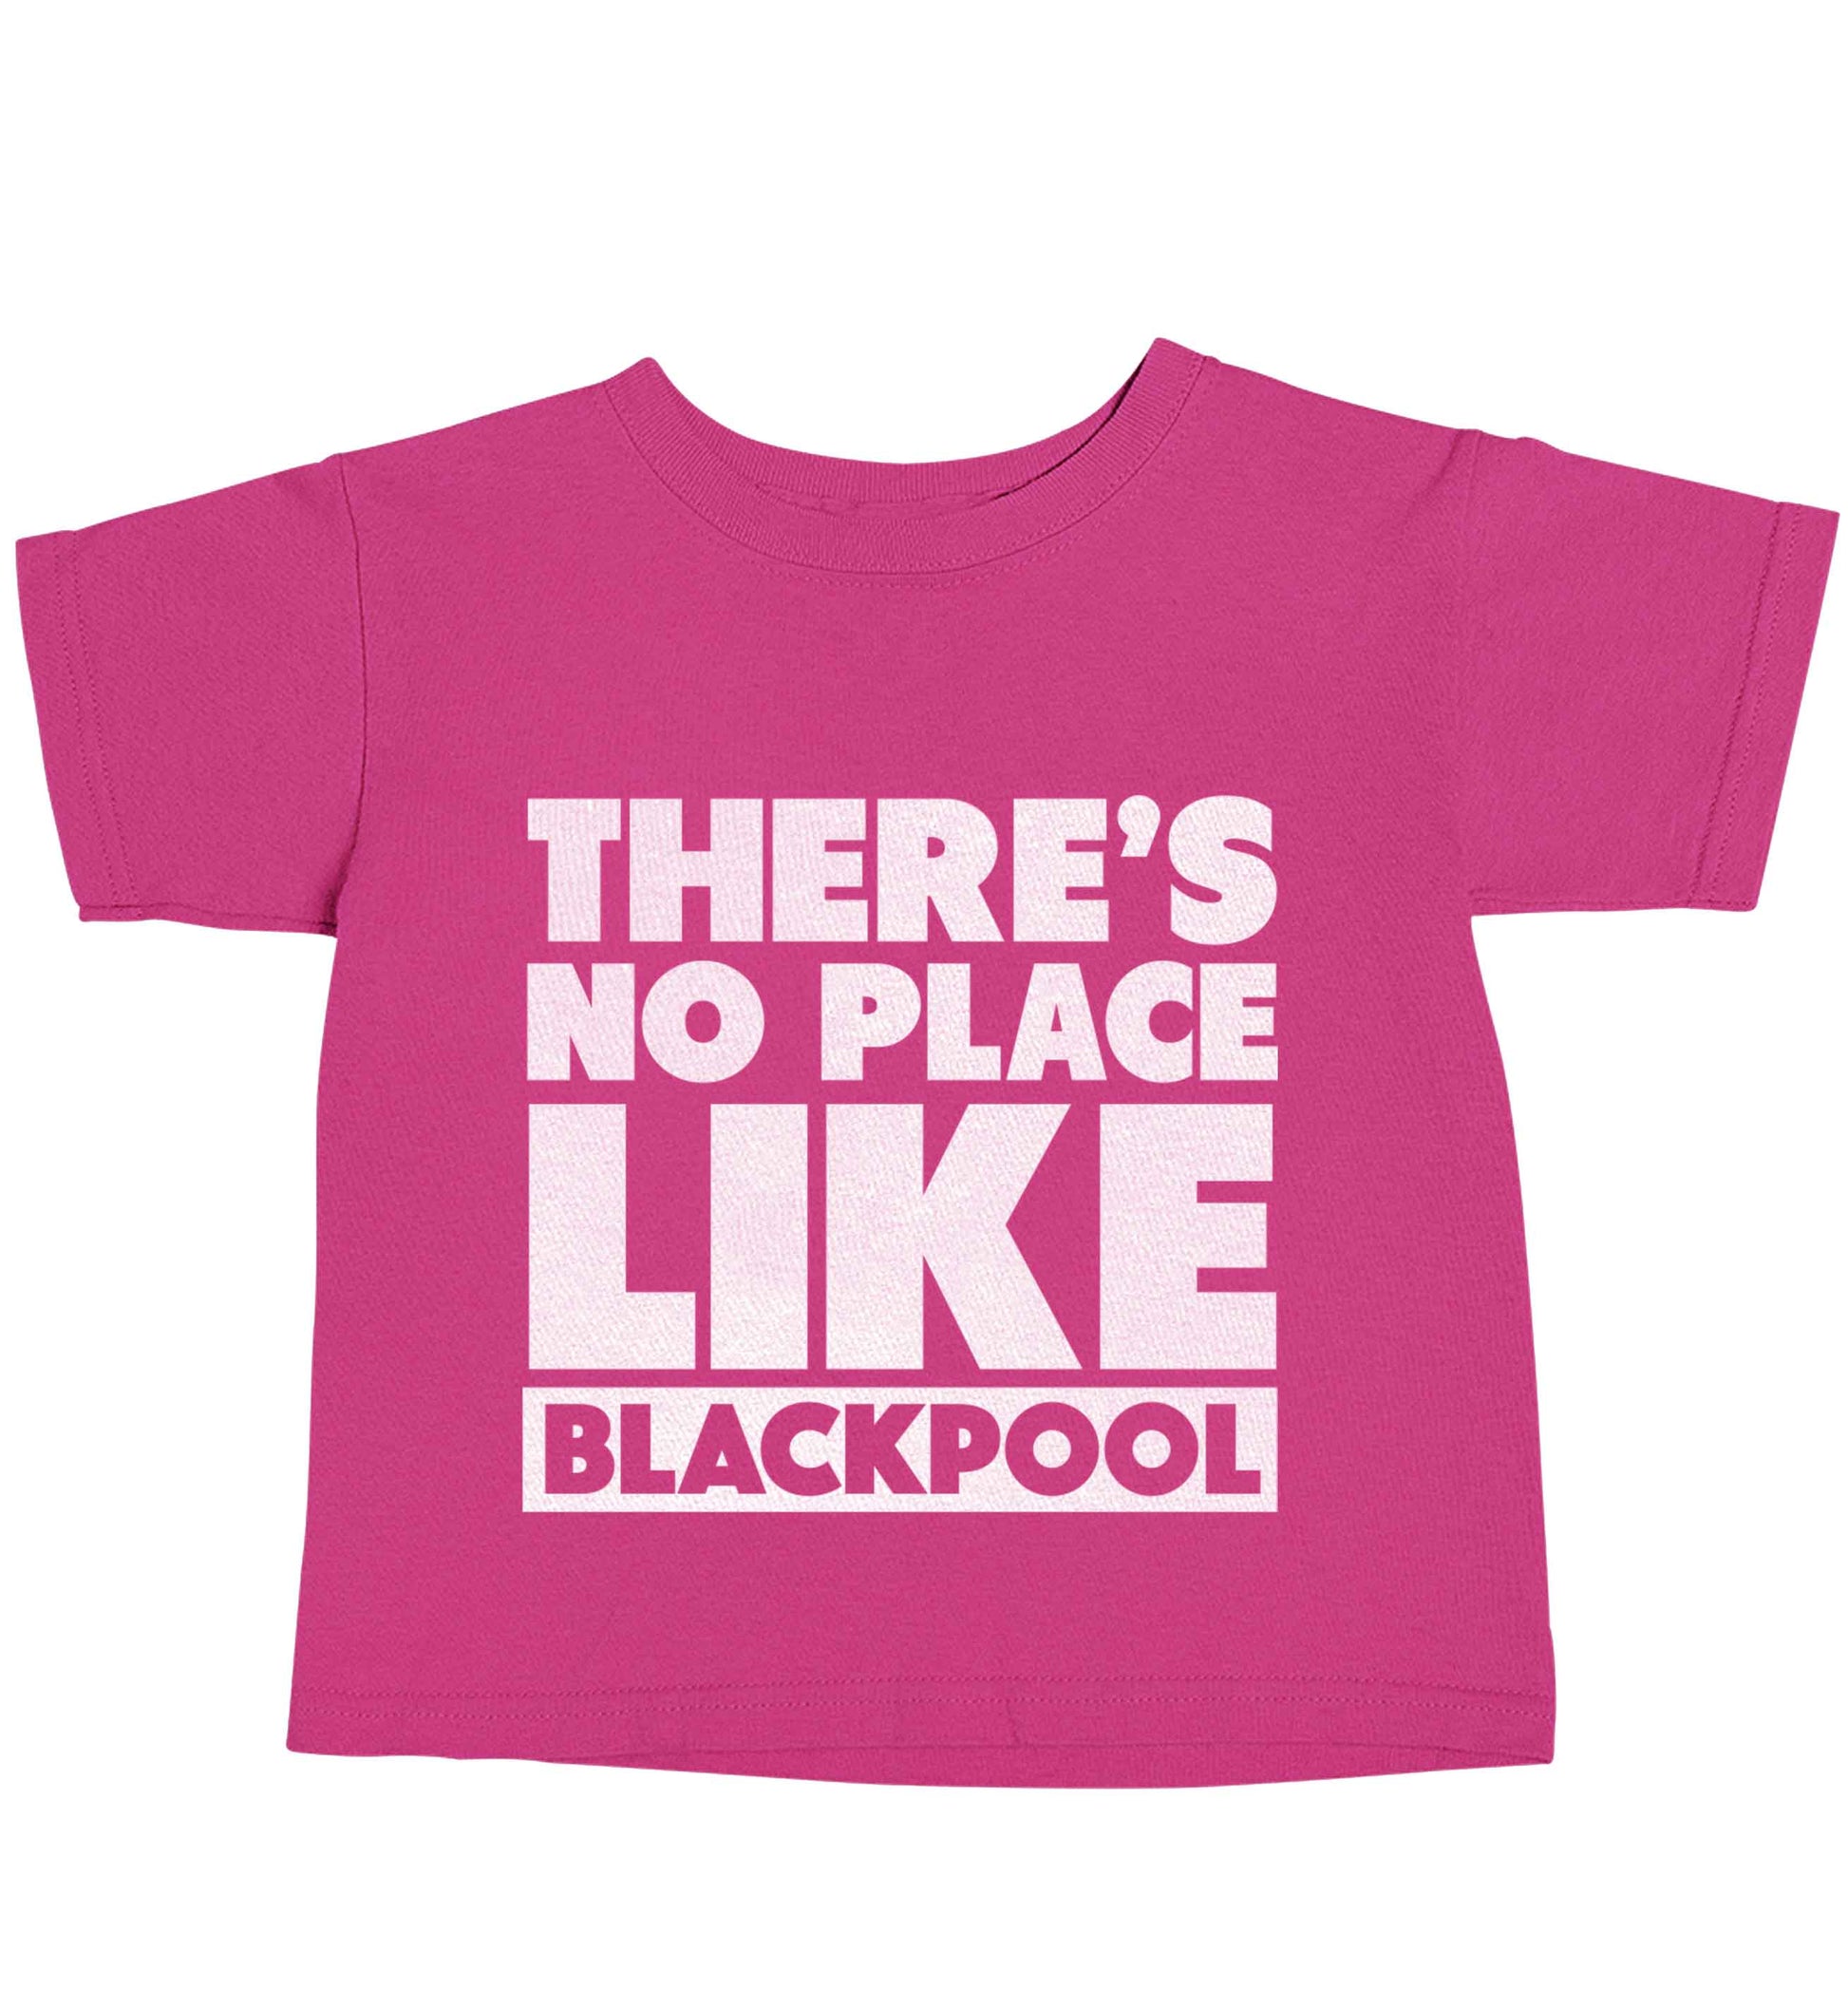 There's no place like Blackpool pink baby toddler Tshirt 2 Years